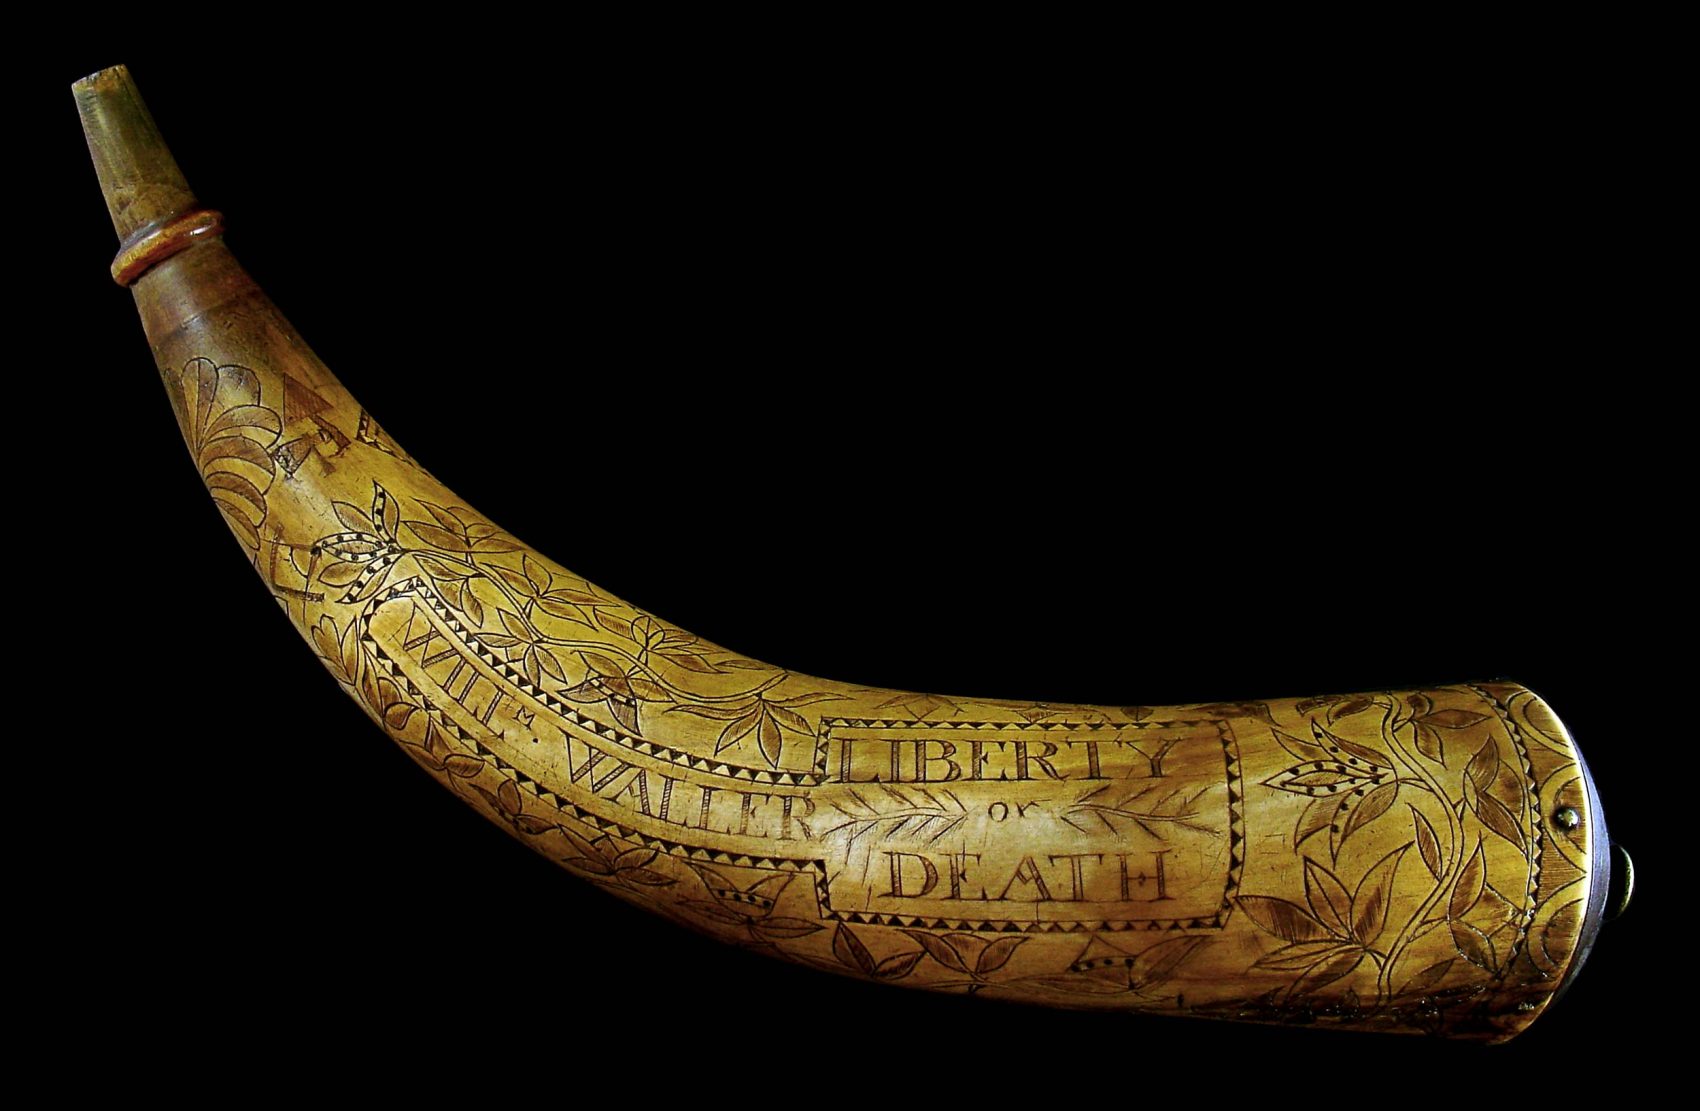 An engraved powder horn bearing several popular slogans of the War of Independence. (Courtesy of the Museum of the American Revolution)